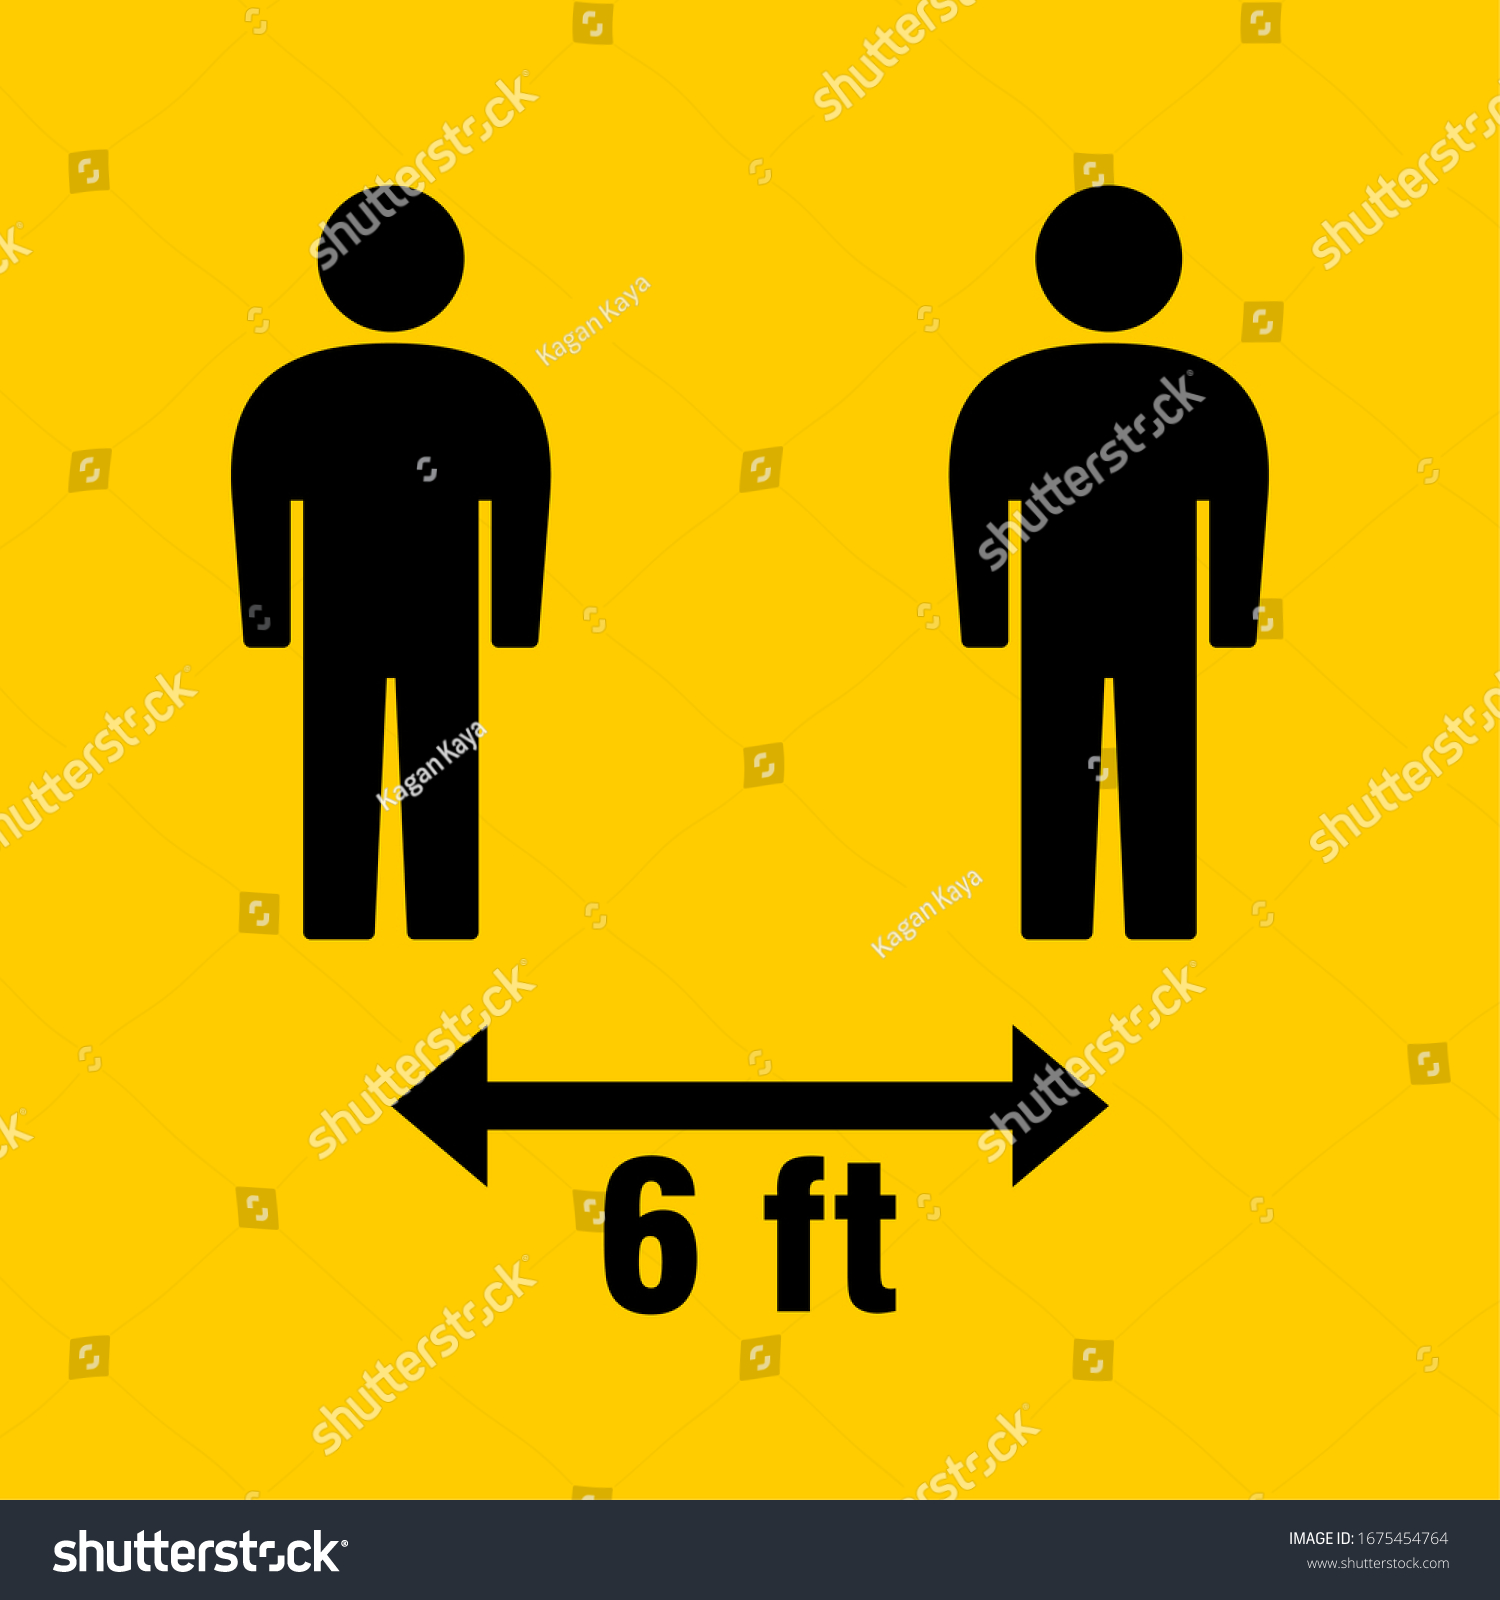 Social Distancing Keep Your Distance 6 Feet Icon. Vector Image. #1675454764